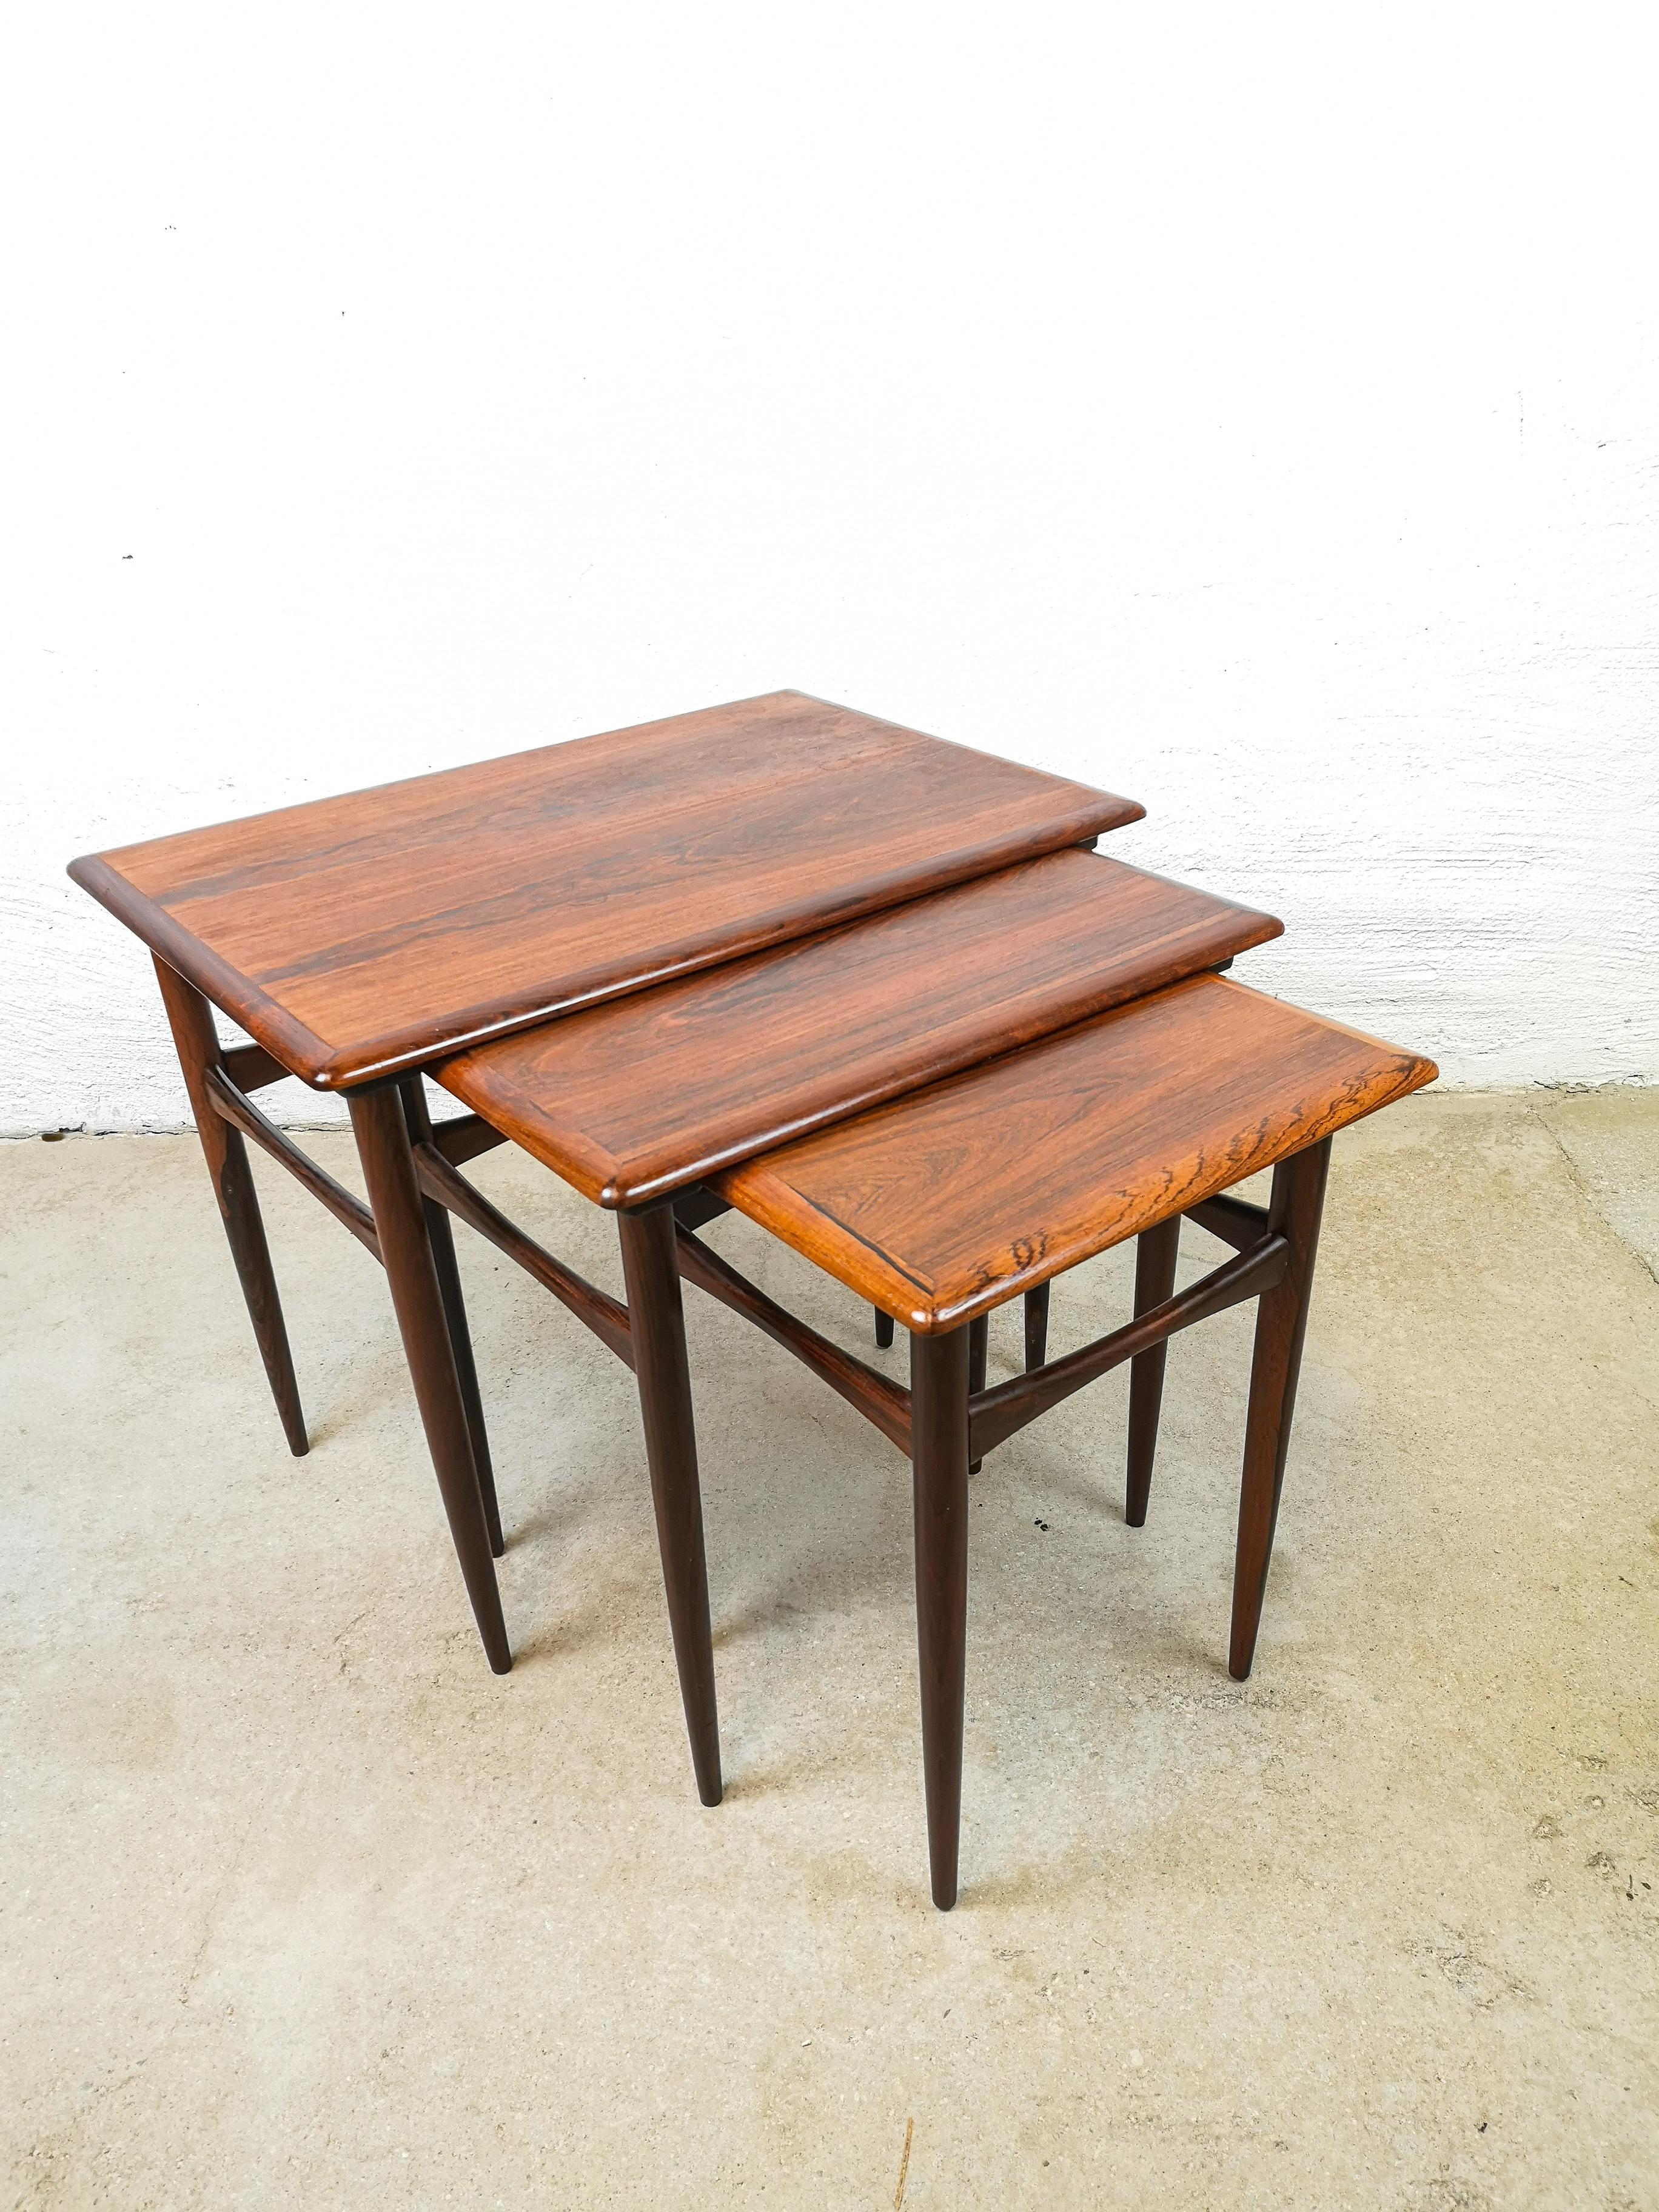 A set of 3 Kai Kristiansen midcentury rosewood coffee tables.

This set of three rosewood tables were designed by Kai Kristiansen and produced by Skovmand & Andersen circa 1960-1969. The tables are made of solid rosewood and teak with rosewood